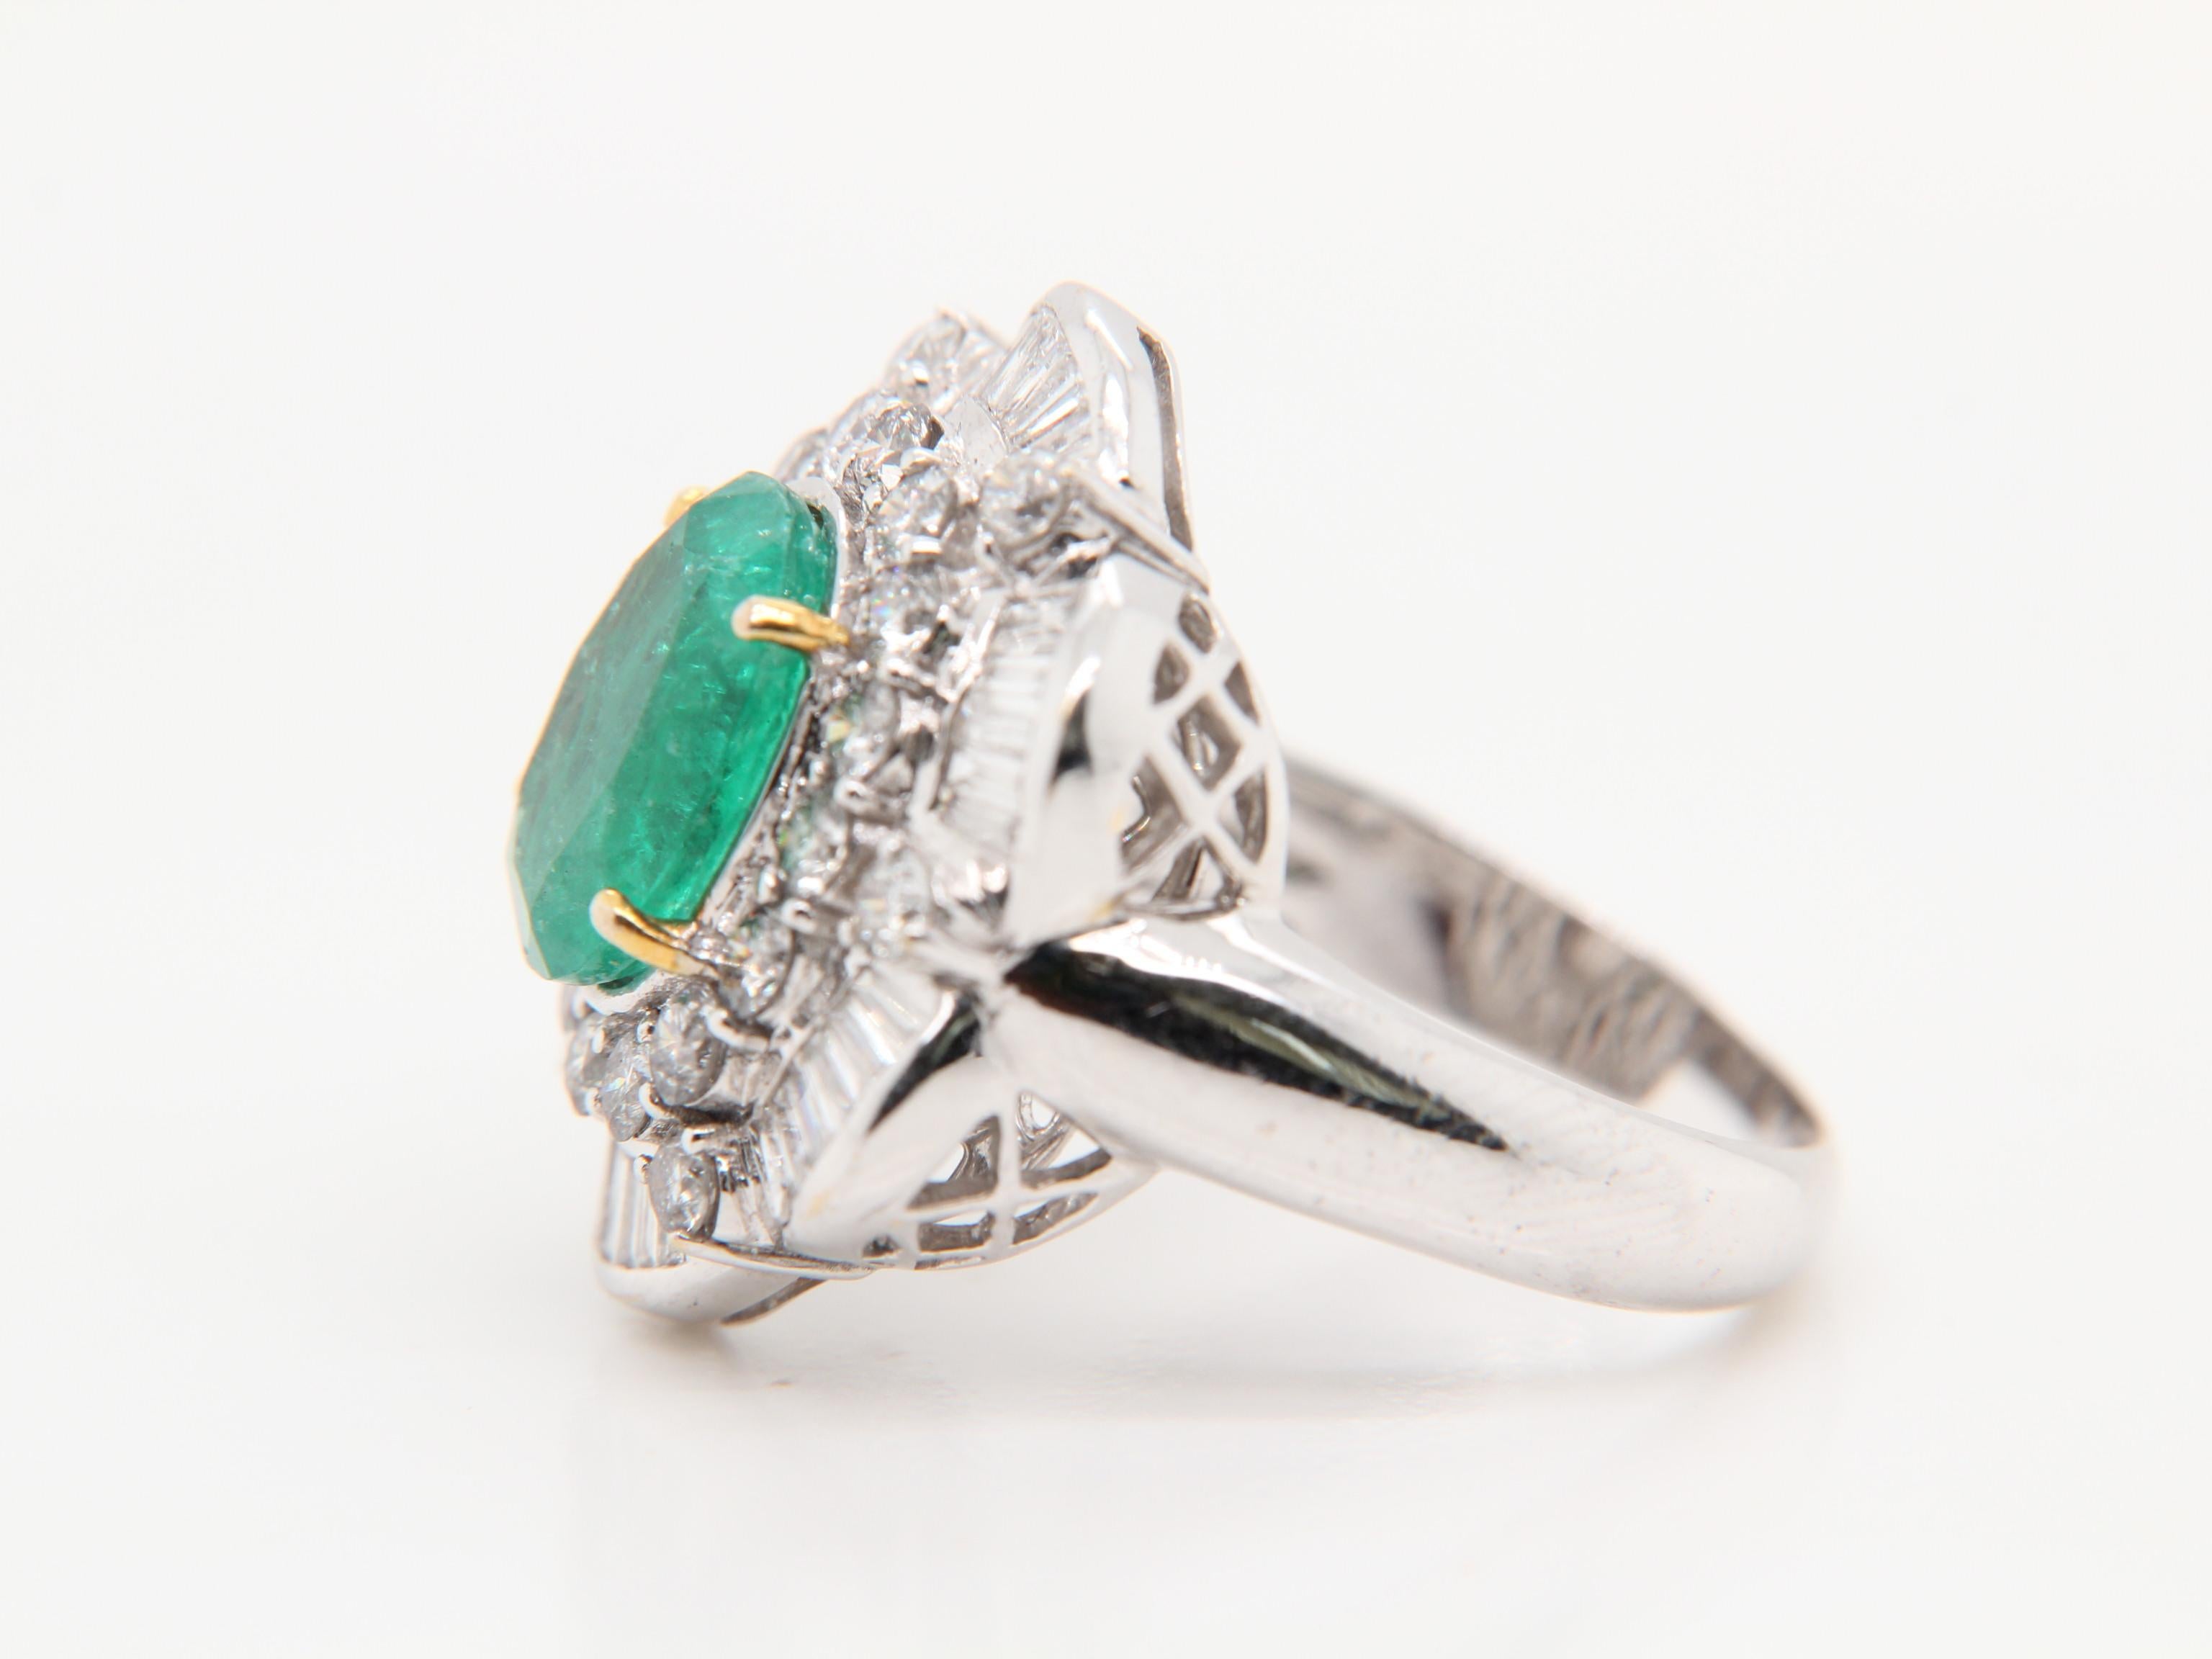 A brand new emerald cocktail ring in 18 karat gold. The centre emerald is oval shaped and weighs approximately 4.00 carats. The diamonds weigh 1.50 carats. The gross weight of the whole ring is 8.44 grams. There is some porosity on the band of the